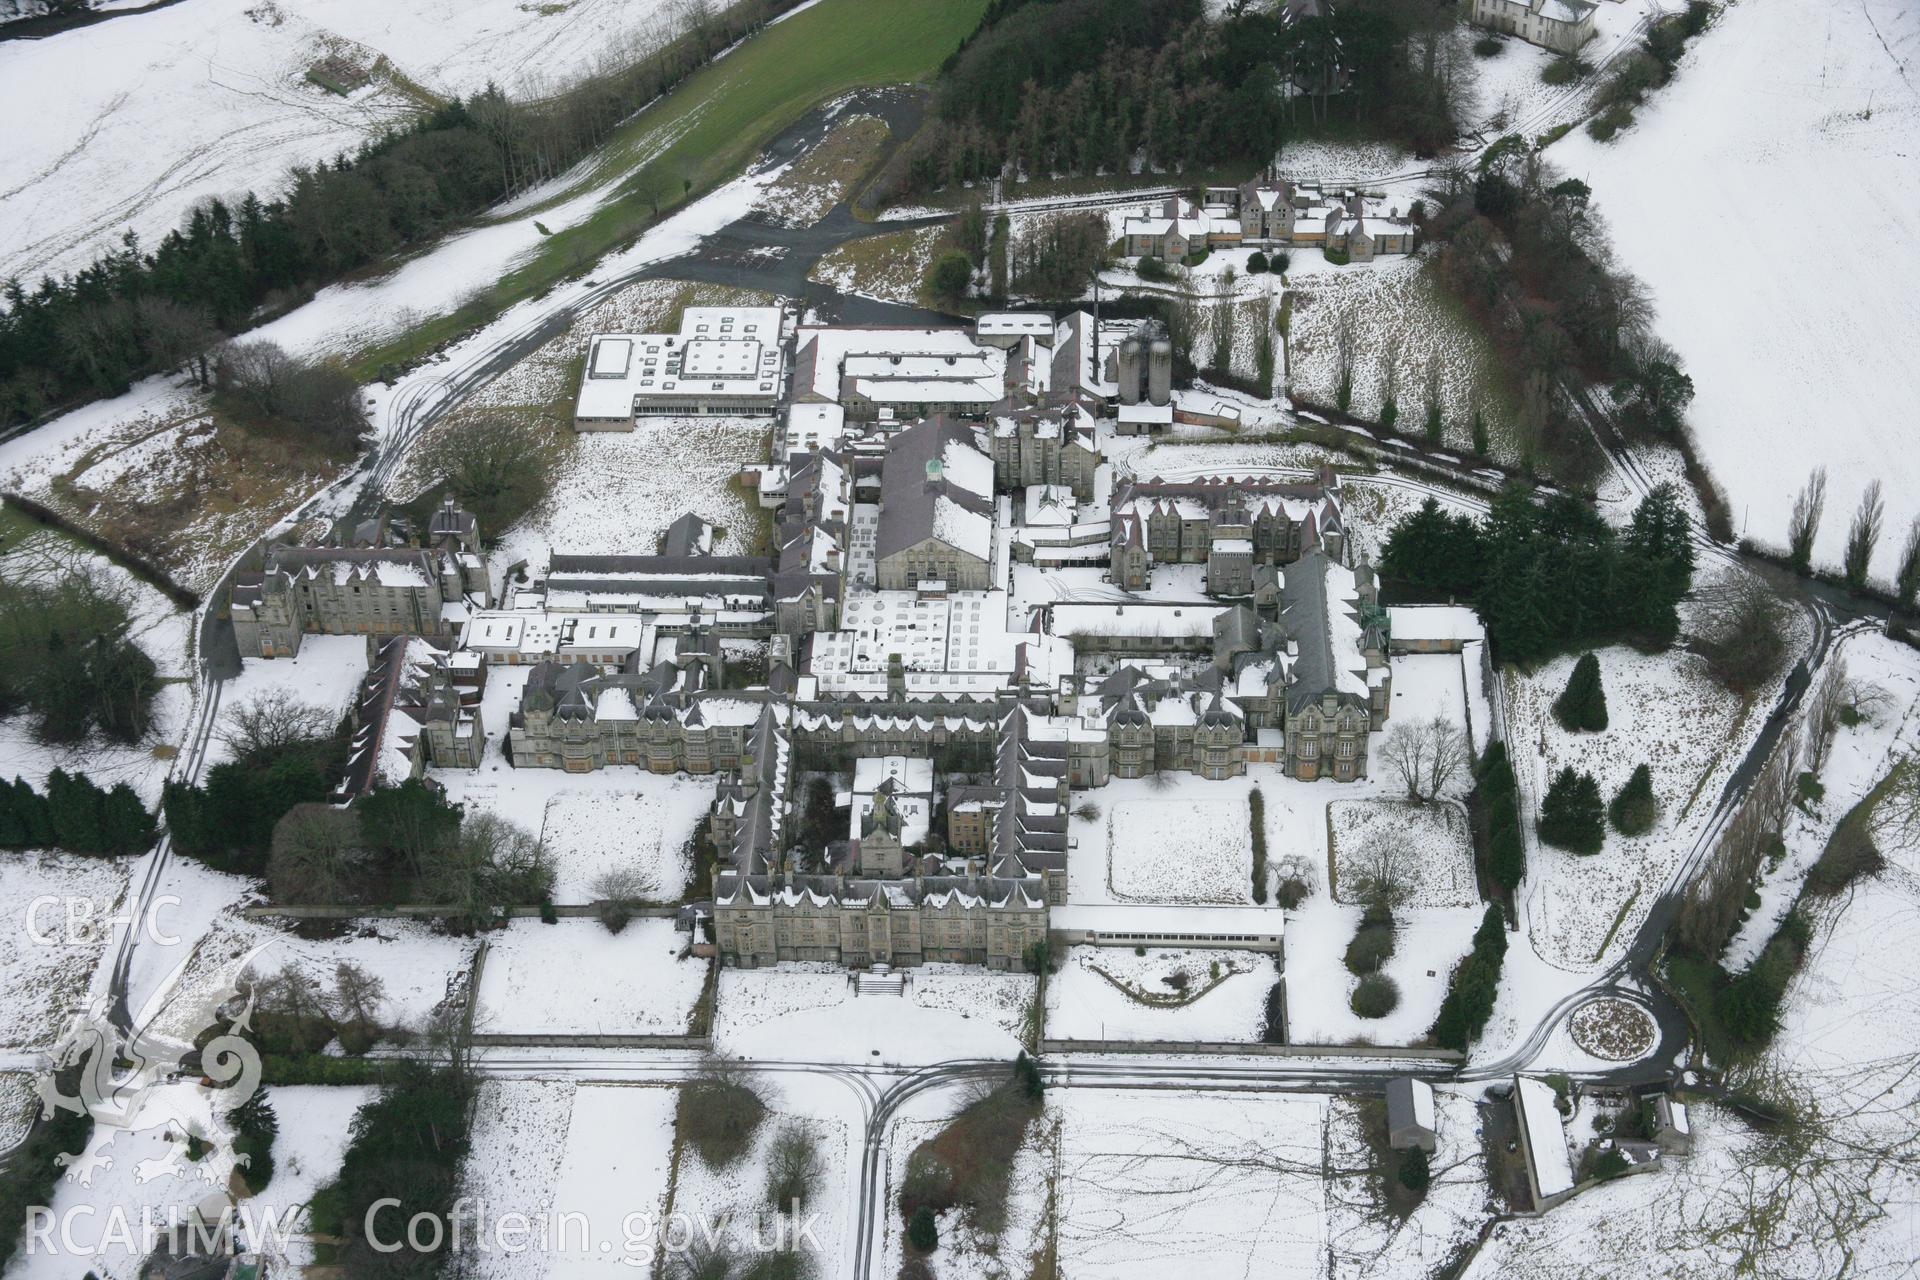 RCAHMW colour oblique aerial photograph of North Wales Counties Mental Hospital Complex, viewed from the north-east. Taken on 06 March 2006 by Toby Driver.